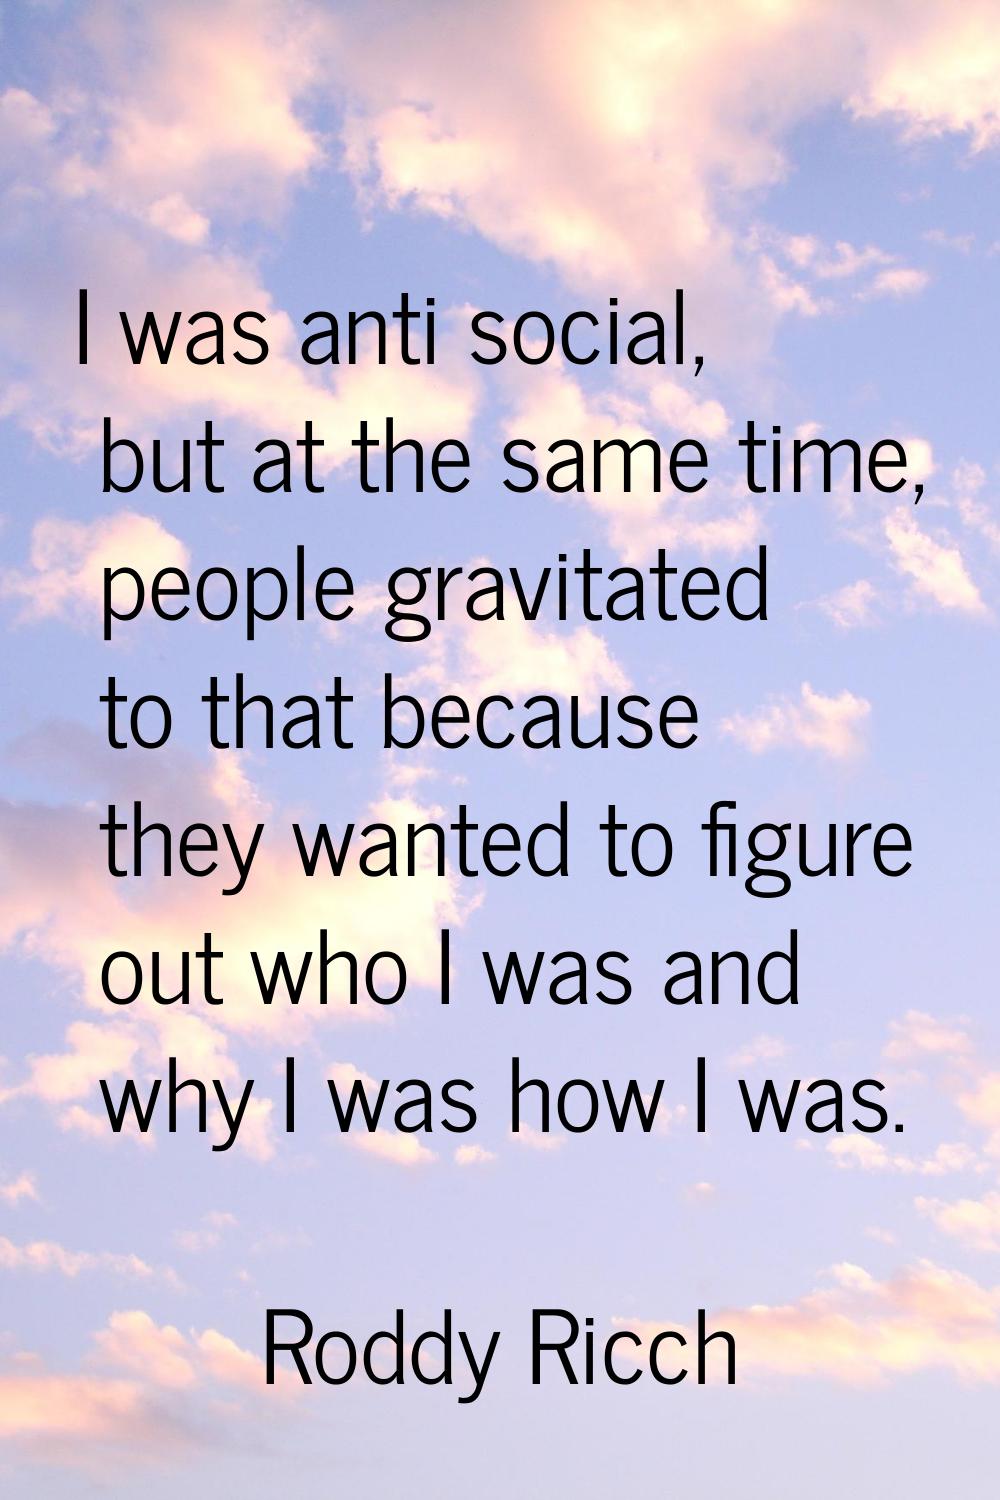 I was anti social, but at the same time, people gravitated to that because they wanted to figure ou